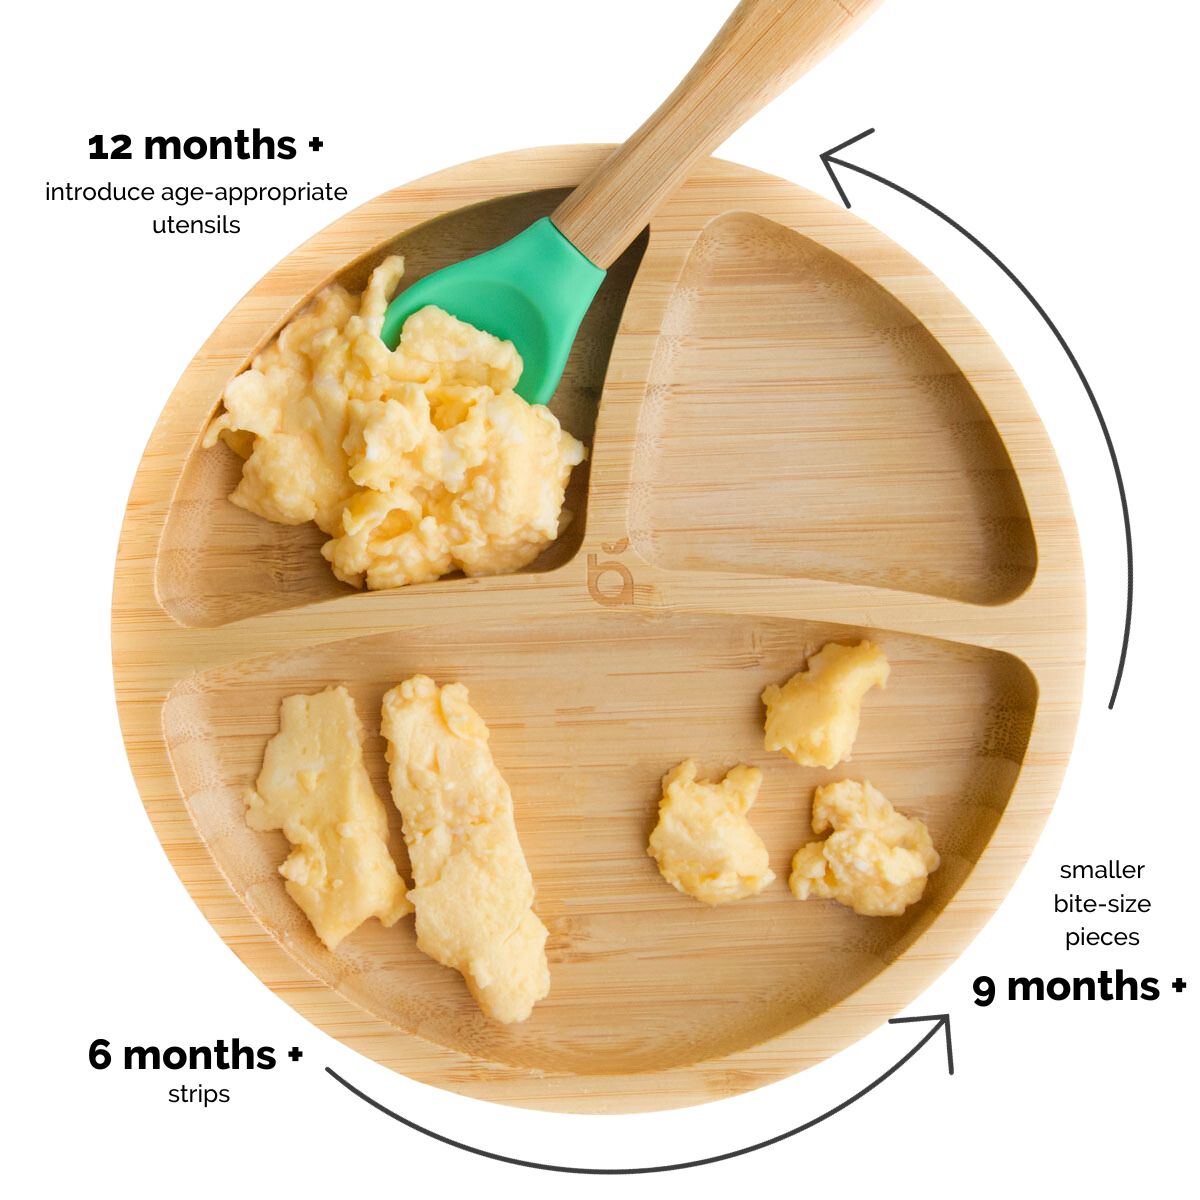 Round Baby Plate Showing Strips of Scrambled Egg for 6 month +, small pieces for 9 month + and Scrambled egg on Spoon for 12 month +.